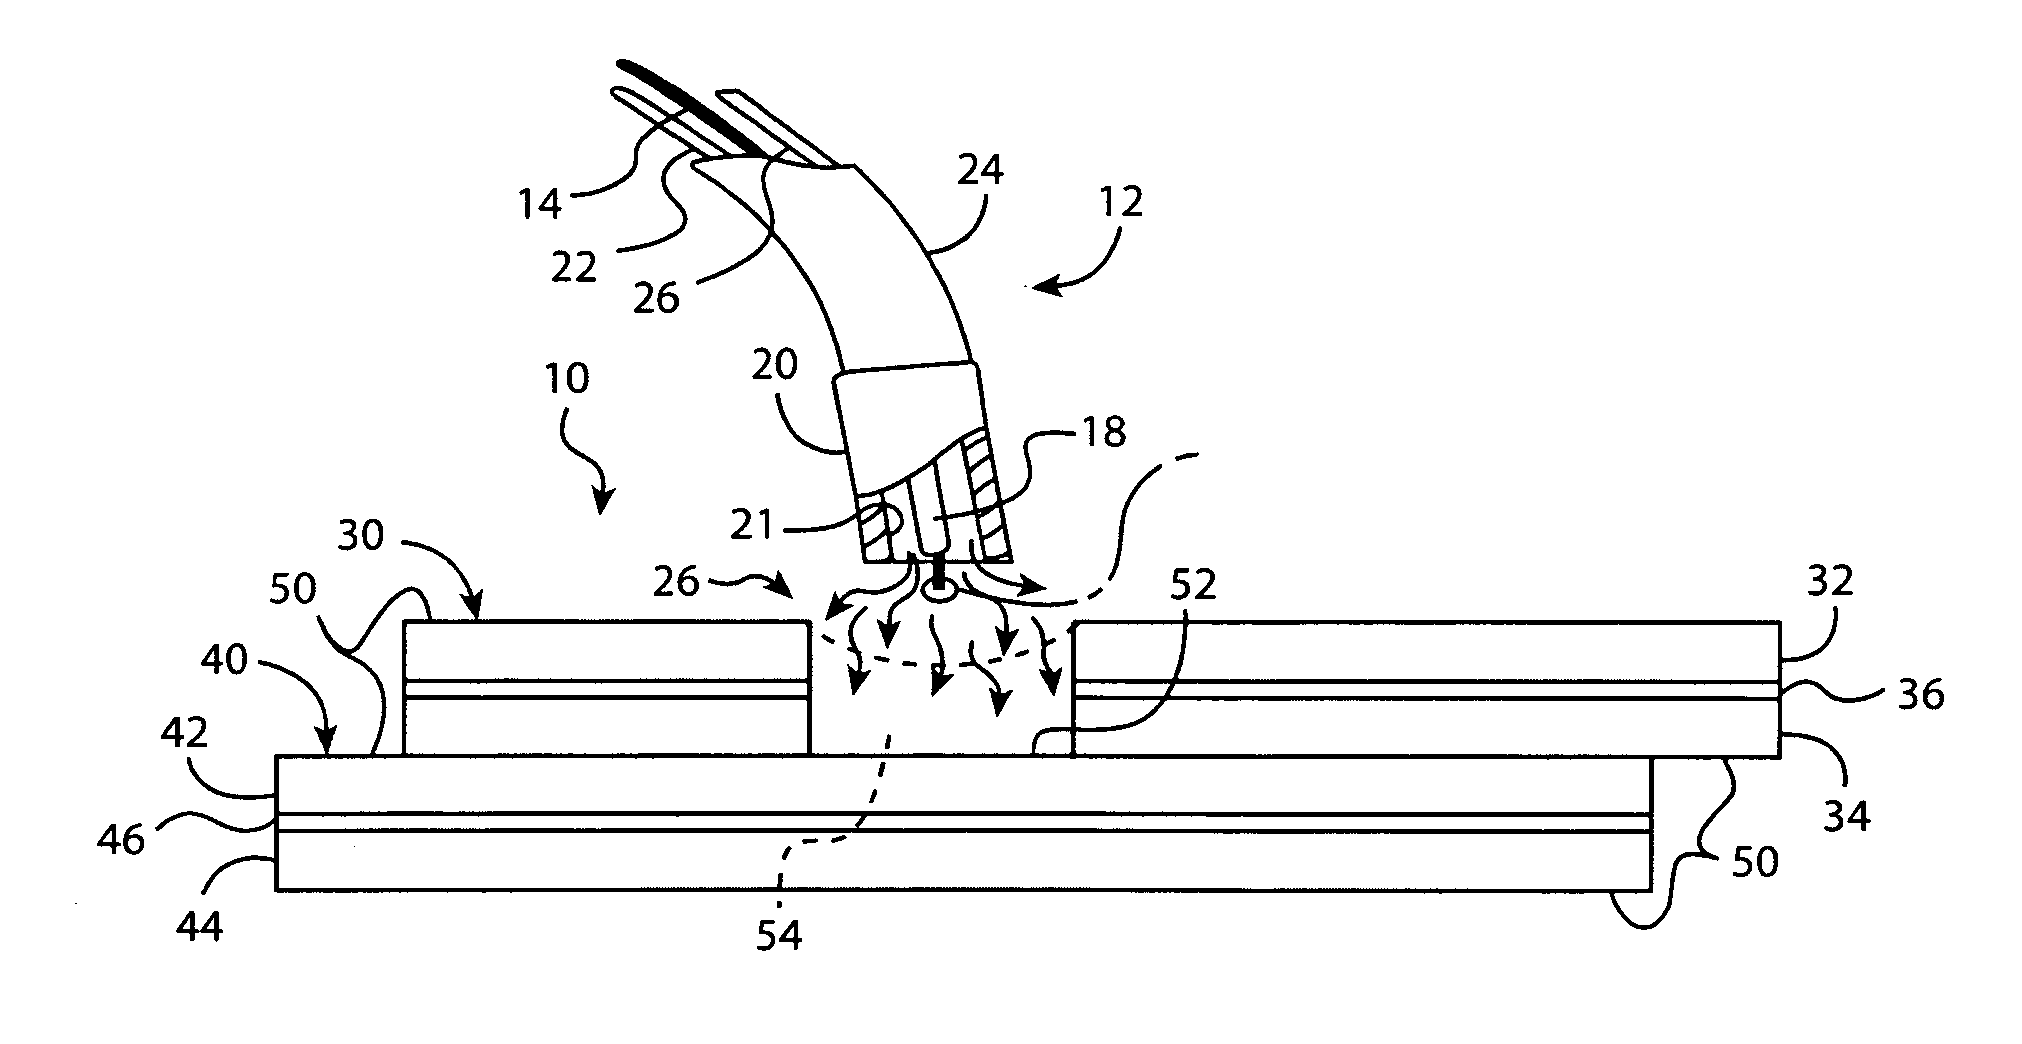 Welded metal laminate structure and method for welding a metal laminate structure